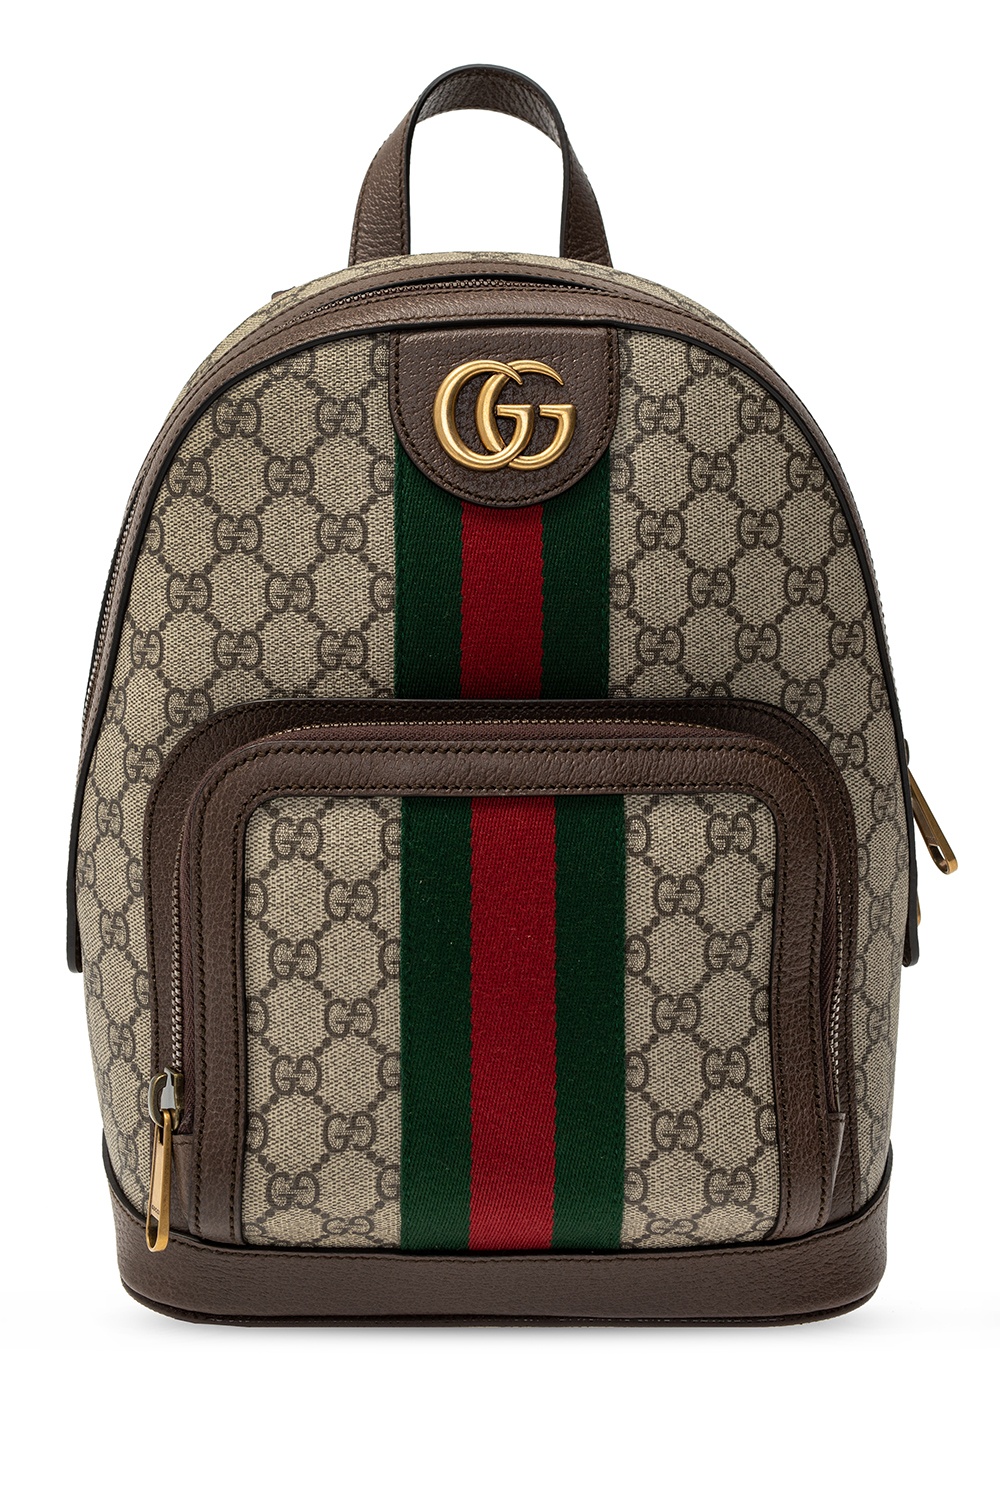 gucci backpack ophidia